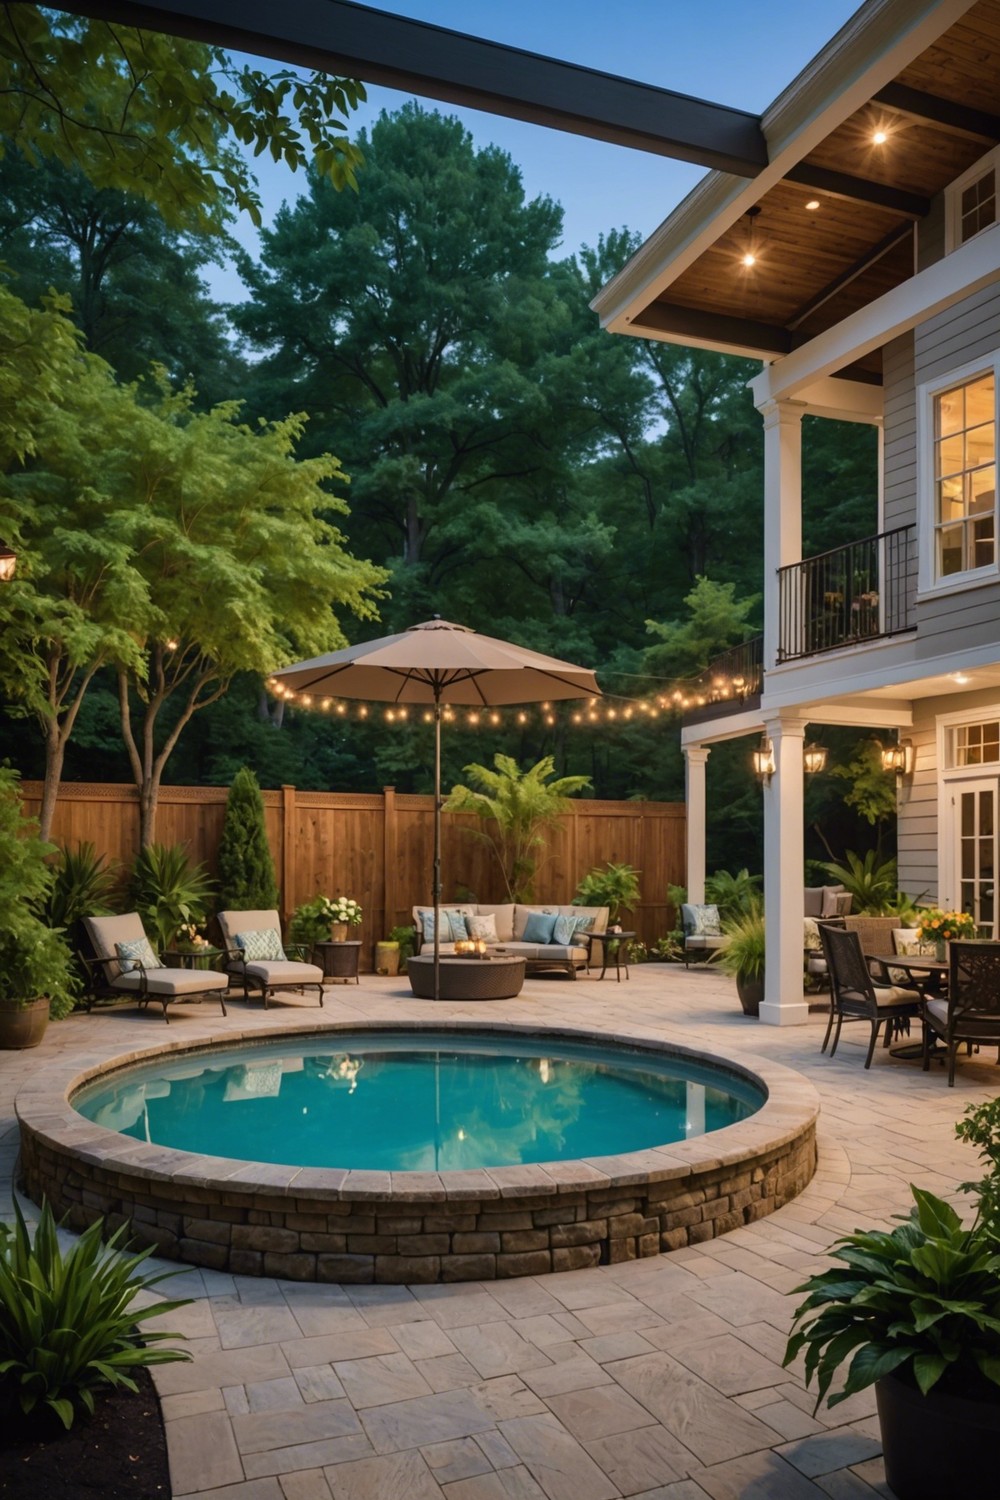 Round Pool with Screened-in Porch